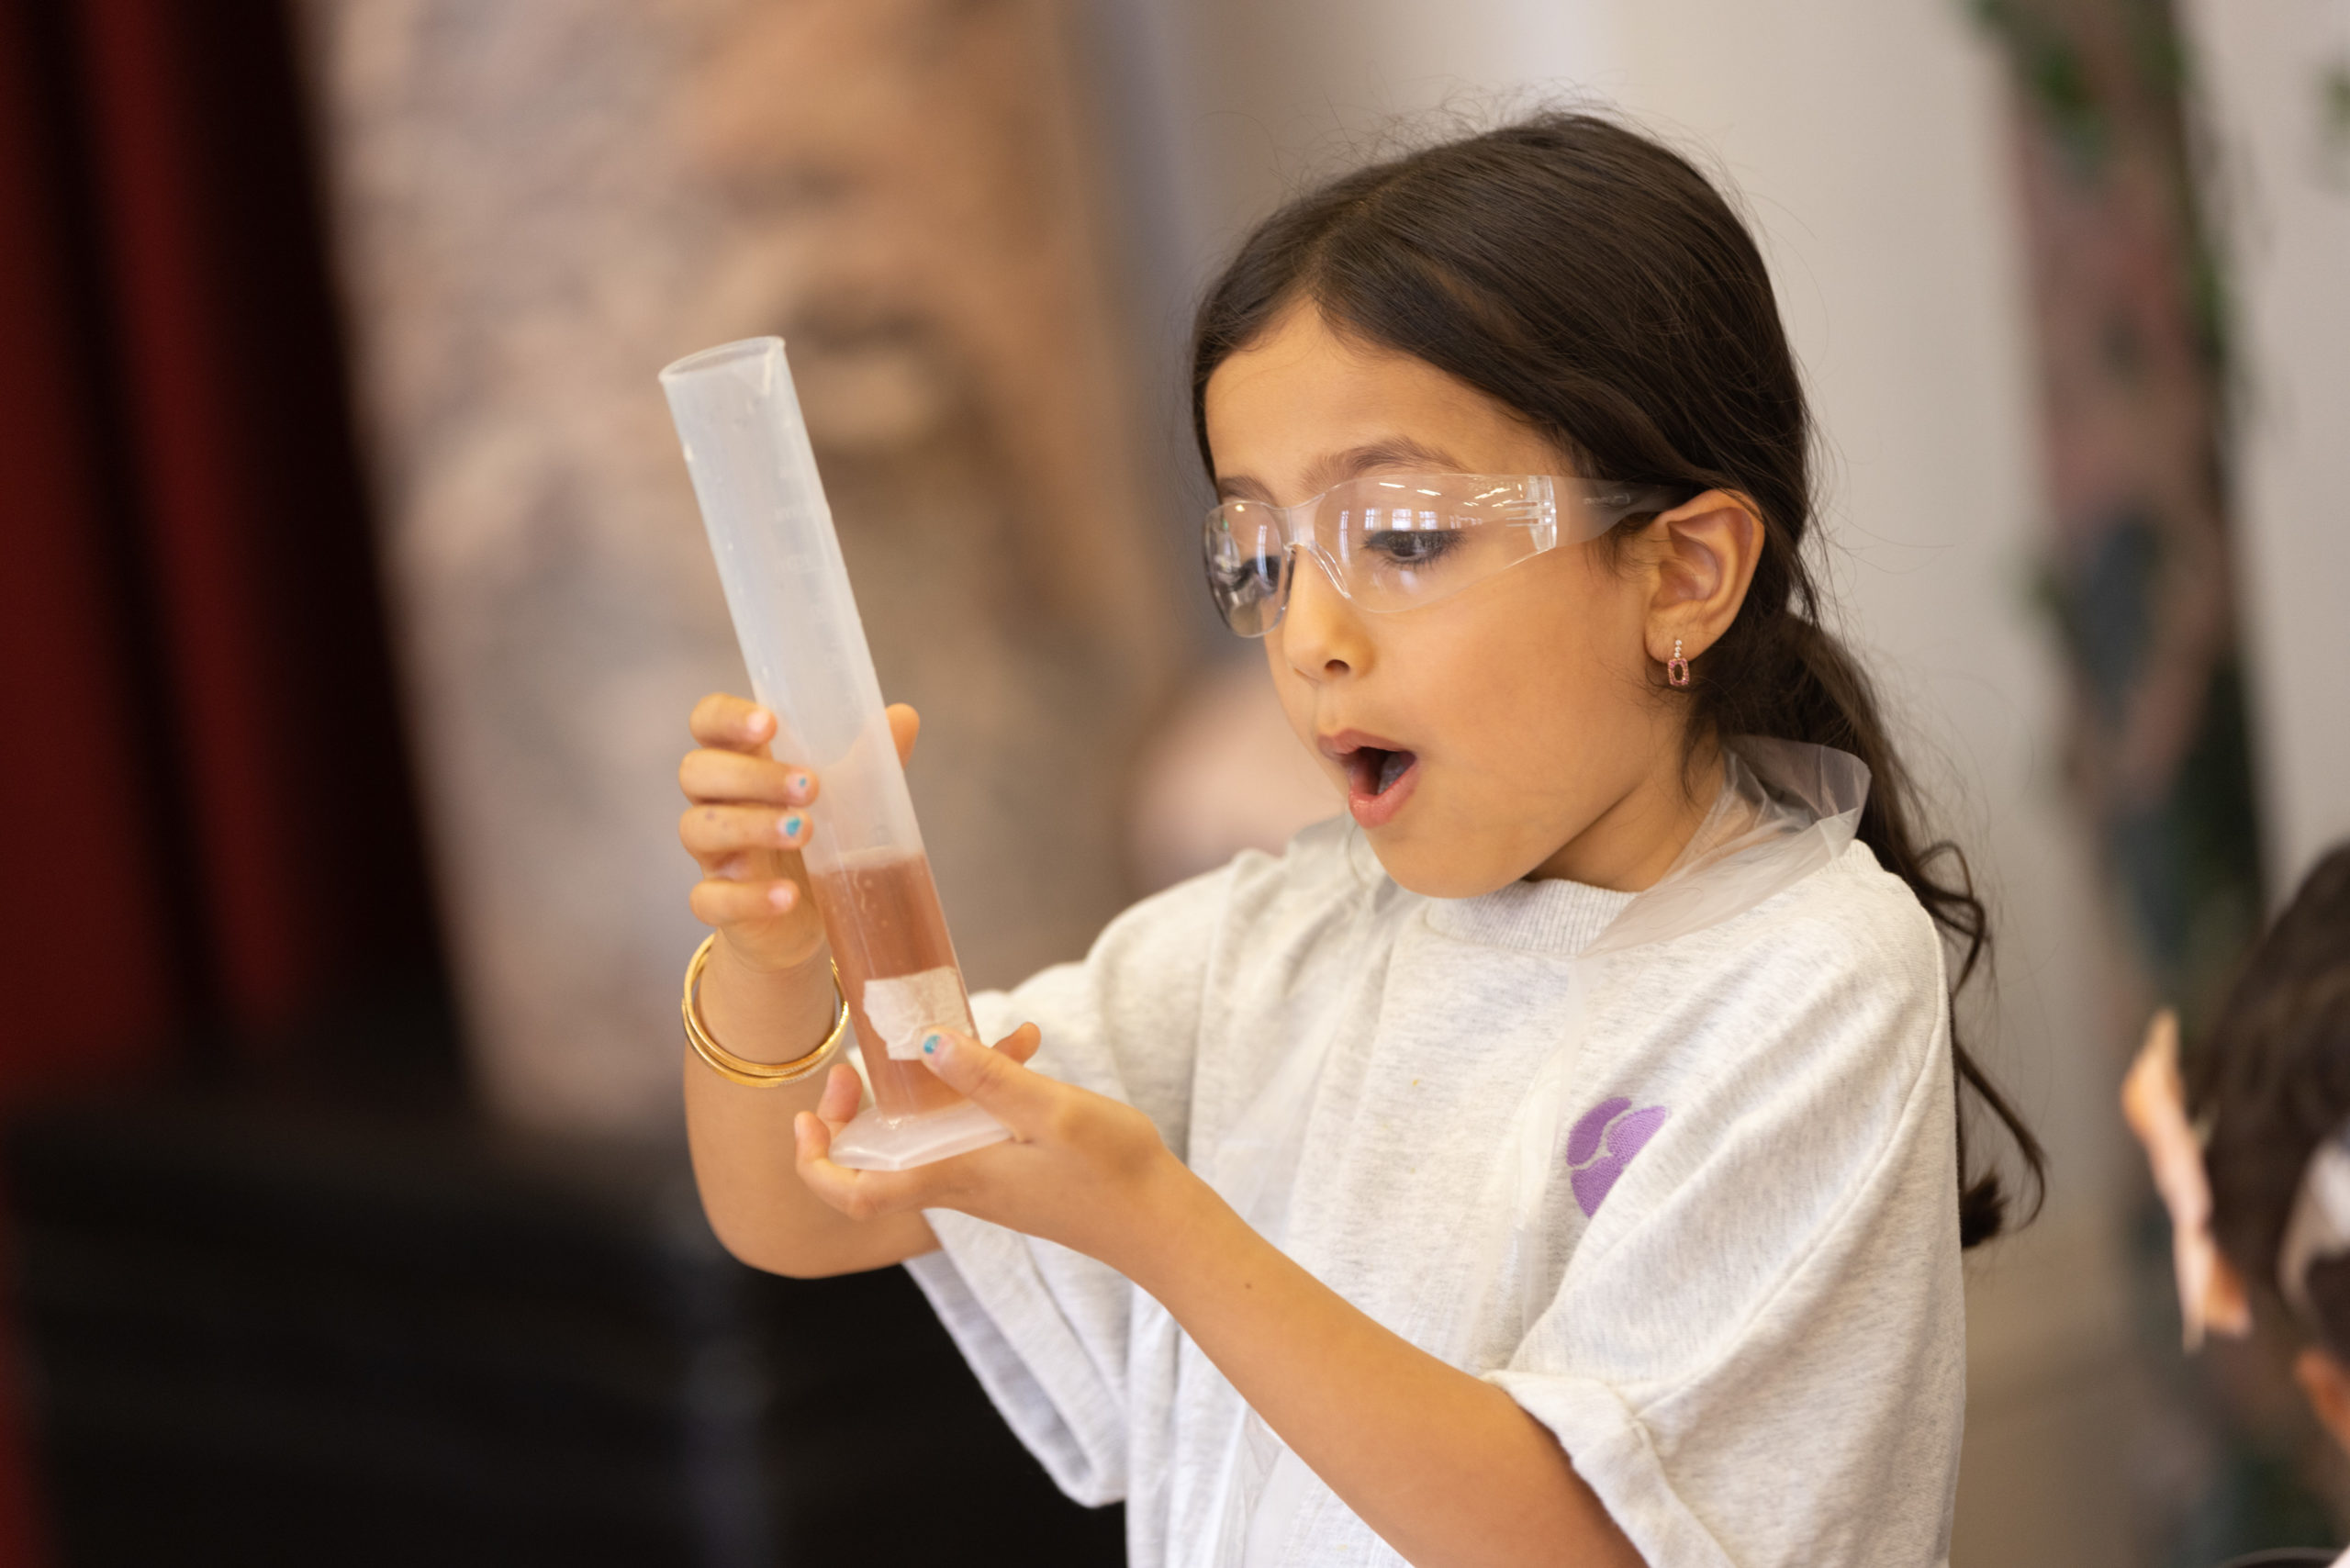 Science camps for children aged 4-8 in London.